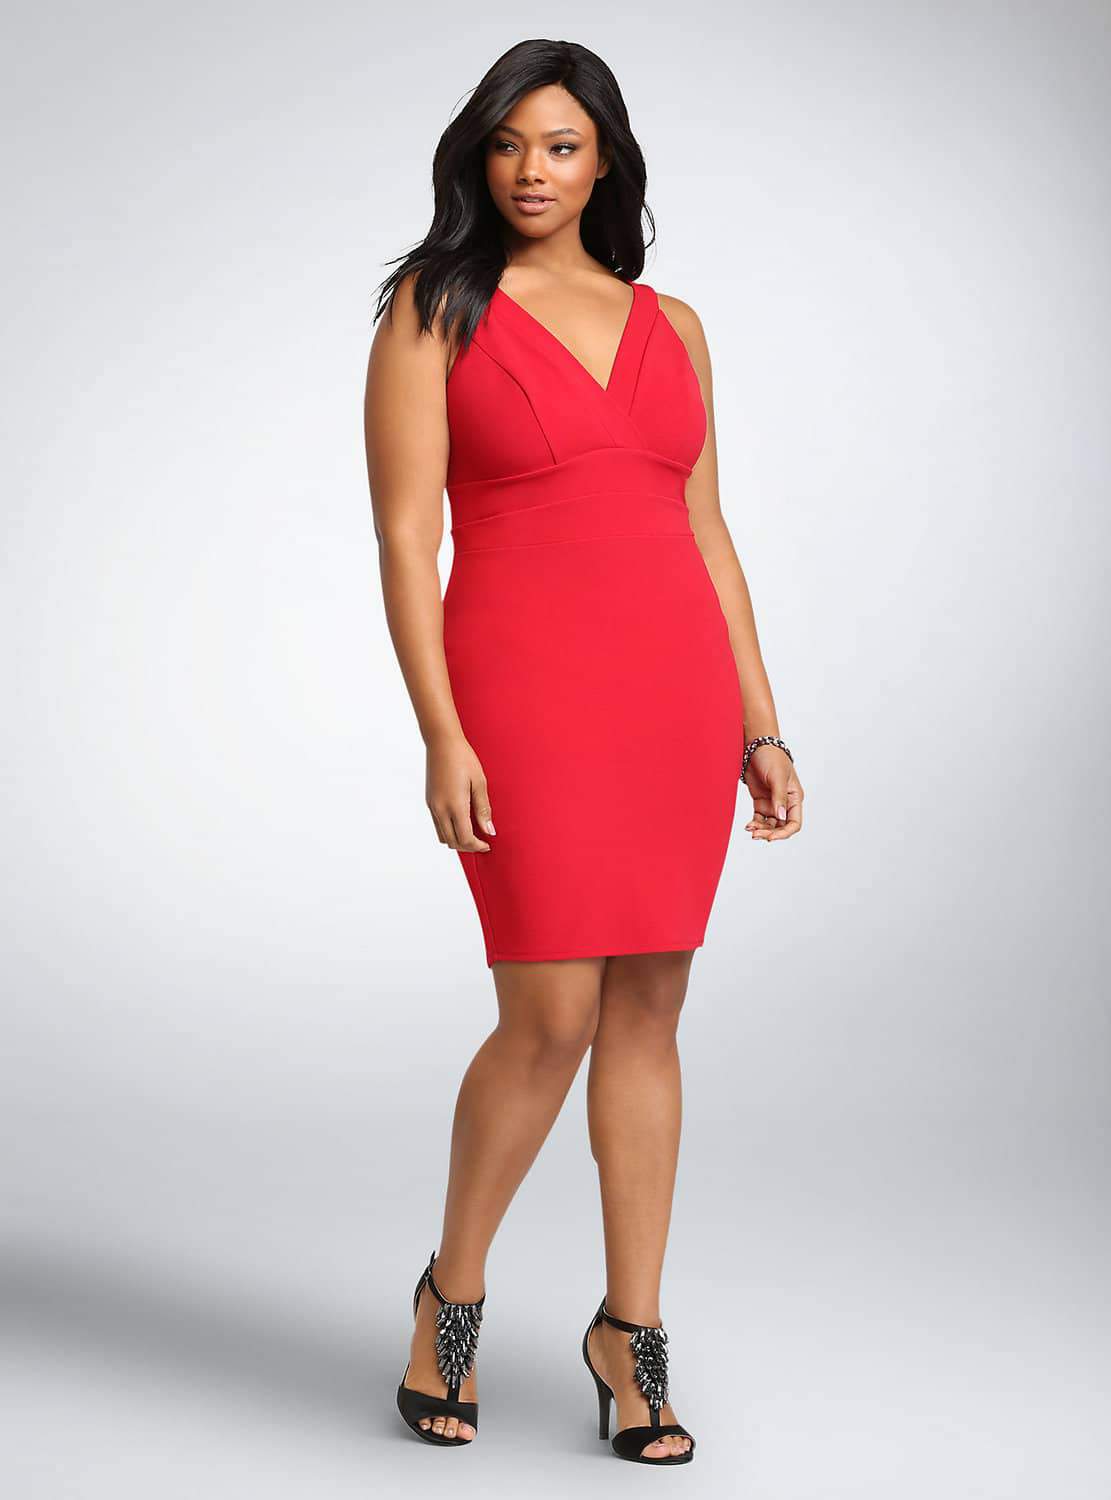 17 Must Rock Plus Size Dresses for that Valentine’s Day Date!